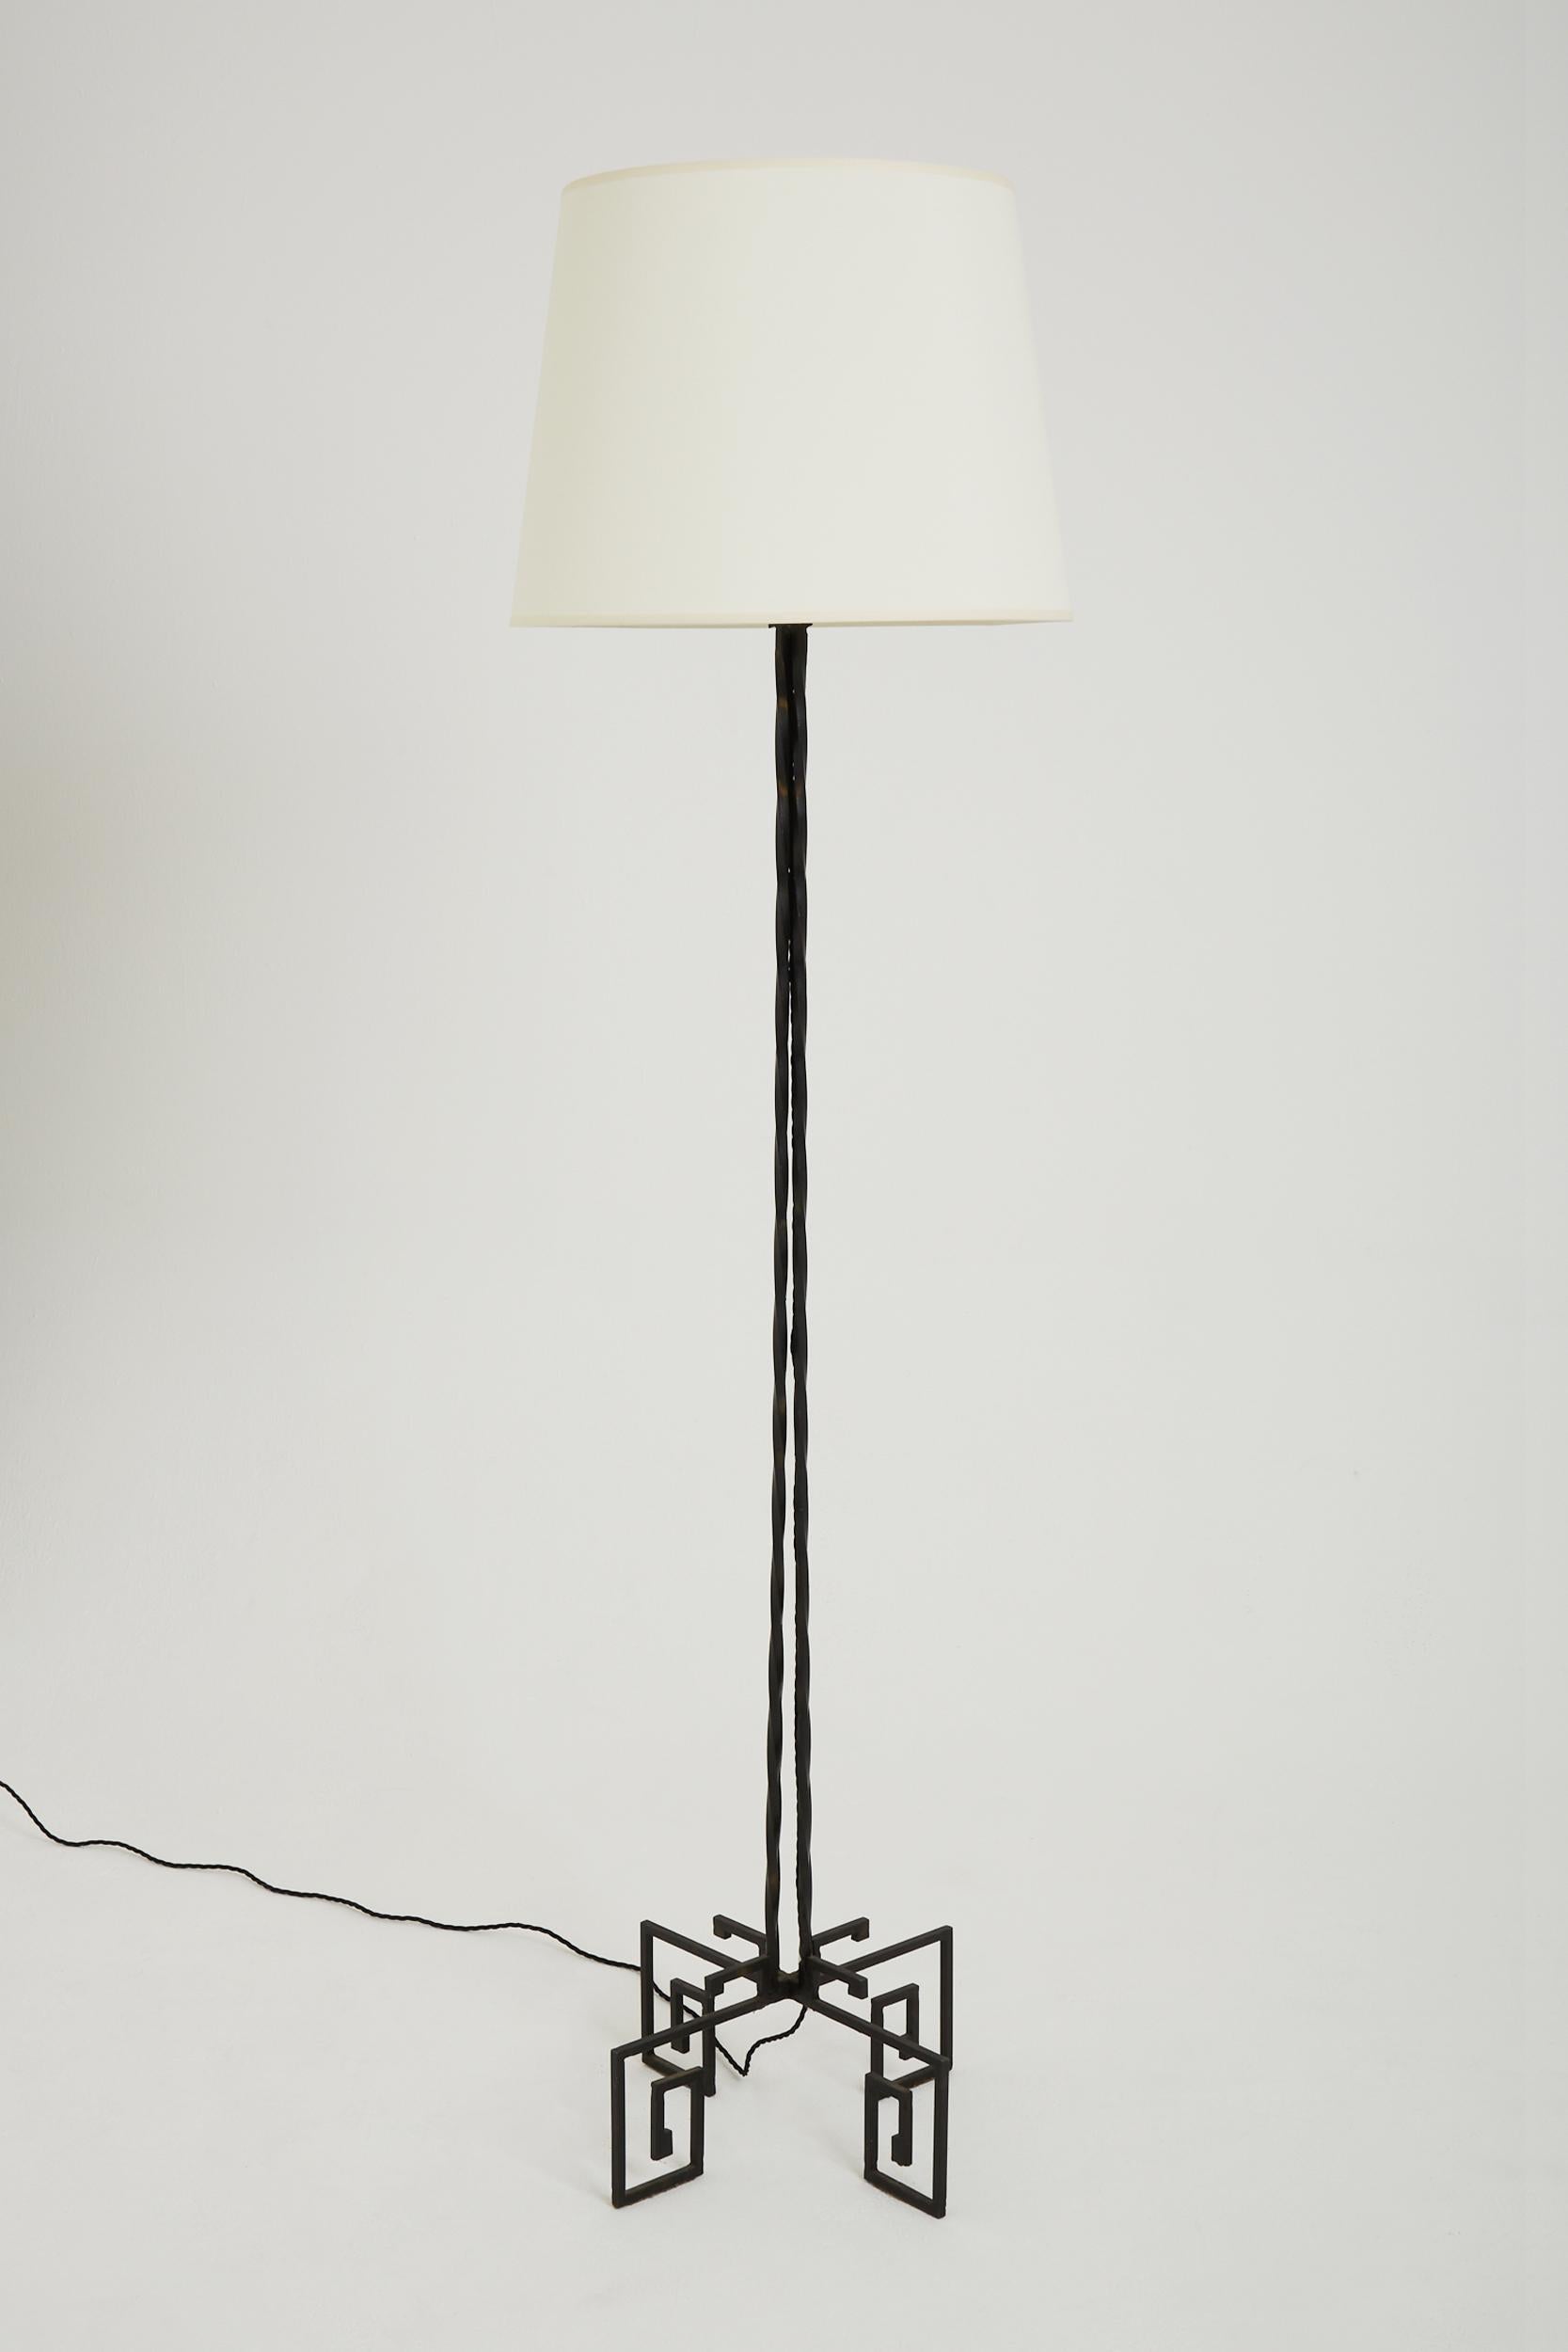 An Art Deco black wrought iron floor lamp, the twisted square-sectioned structure on a greek keep quadripod base.
France, Circa 1930.
With the shade: 190 cm high by 50 cm diameter.
Lamp base only: 156 cm high by 46 cm square.